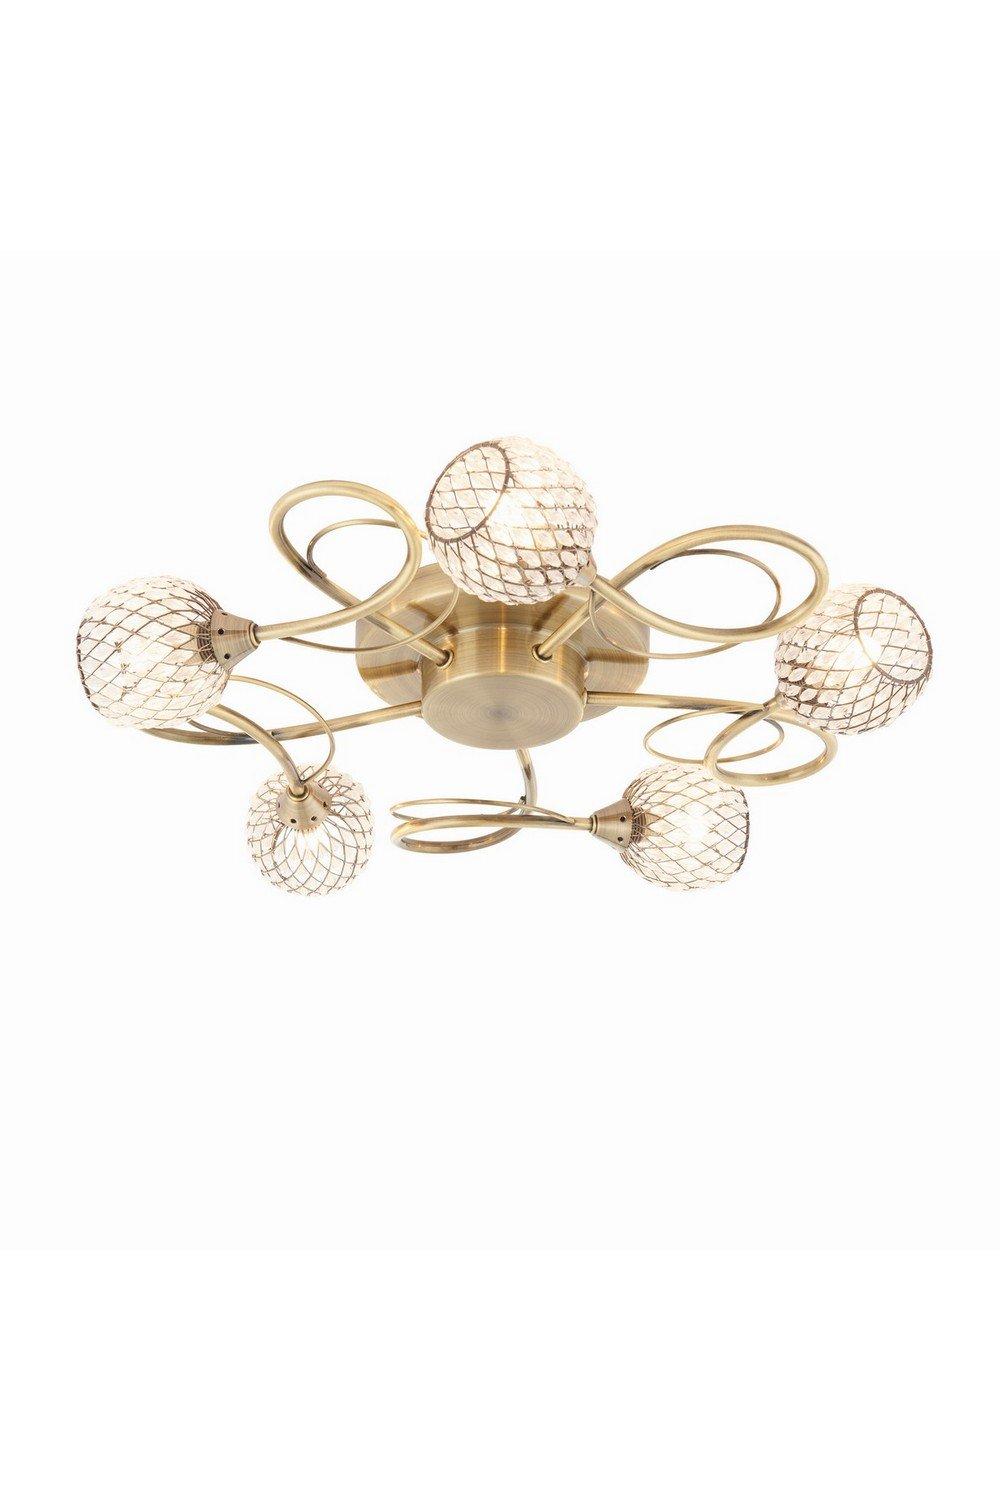 Aherne 5 Light Semi flush Antique Brass With Antique Brass Wire Bead Shade G9